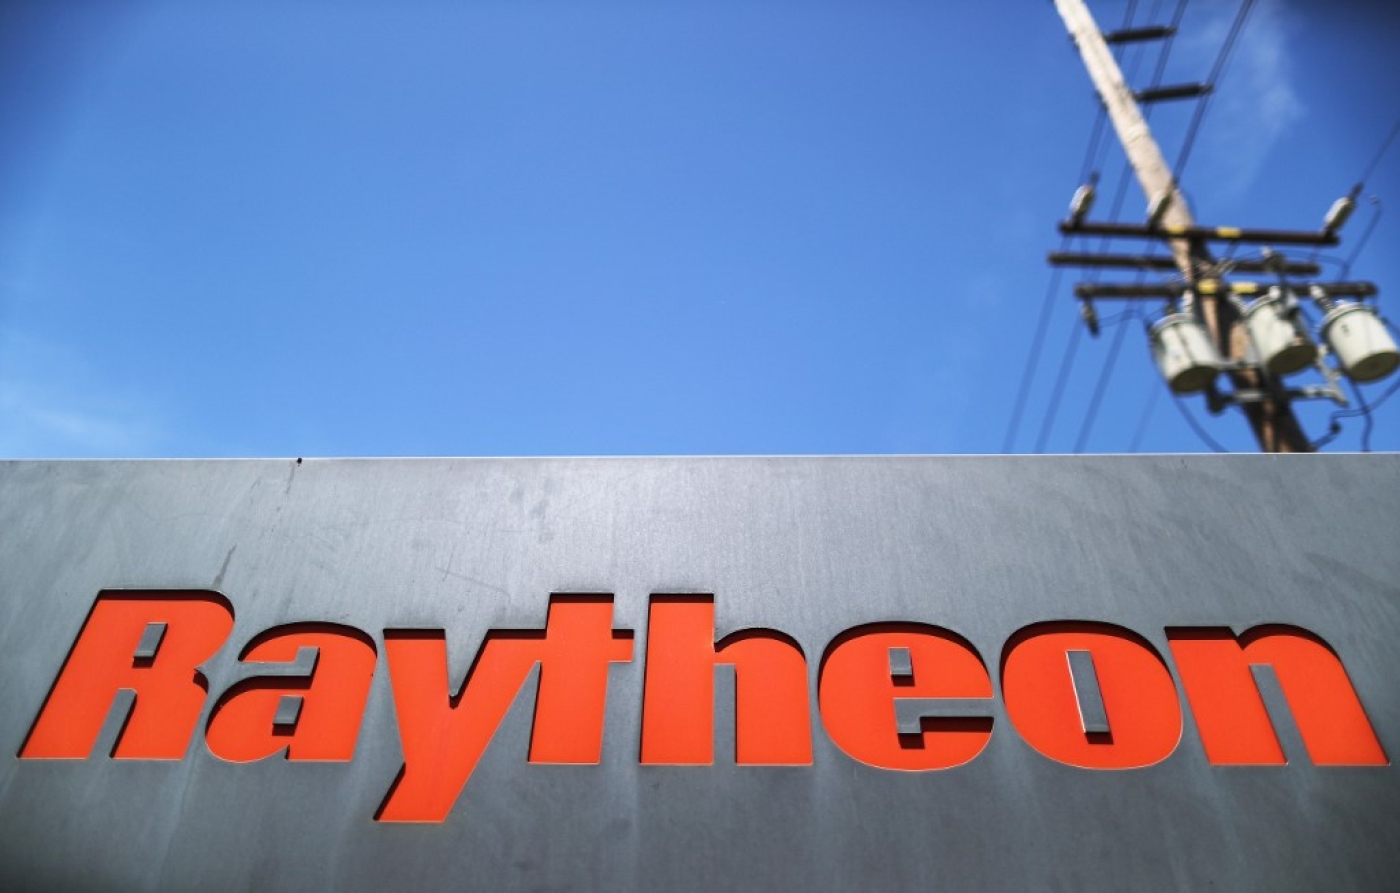 The move will give Raytheon a licence to sell weapons directly to the Saudi government